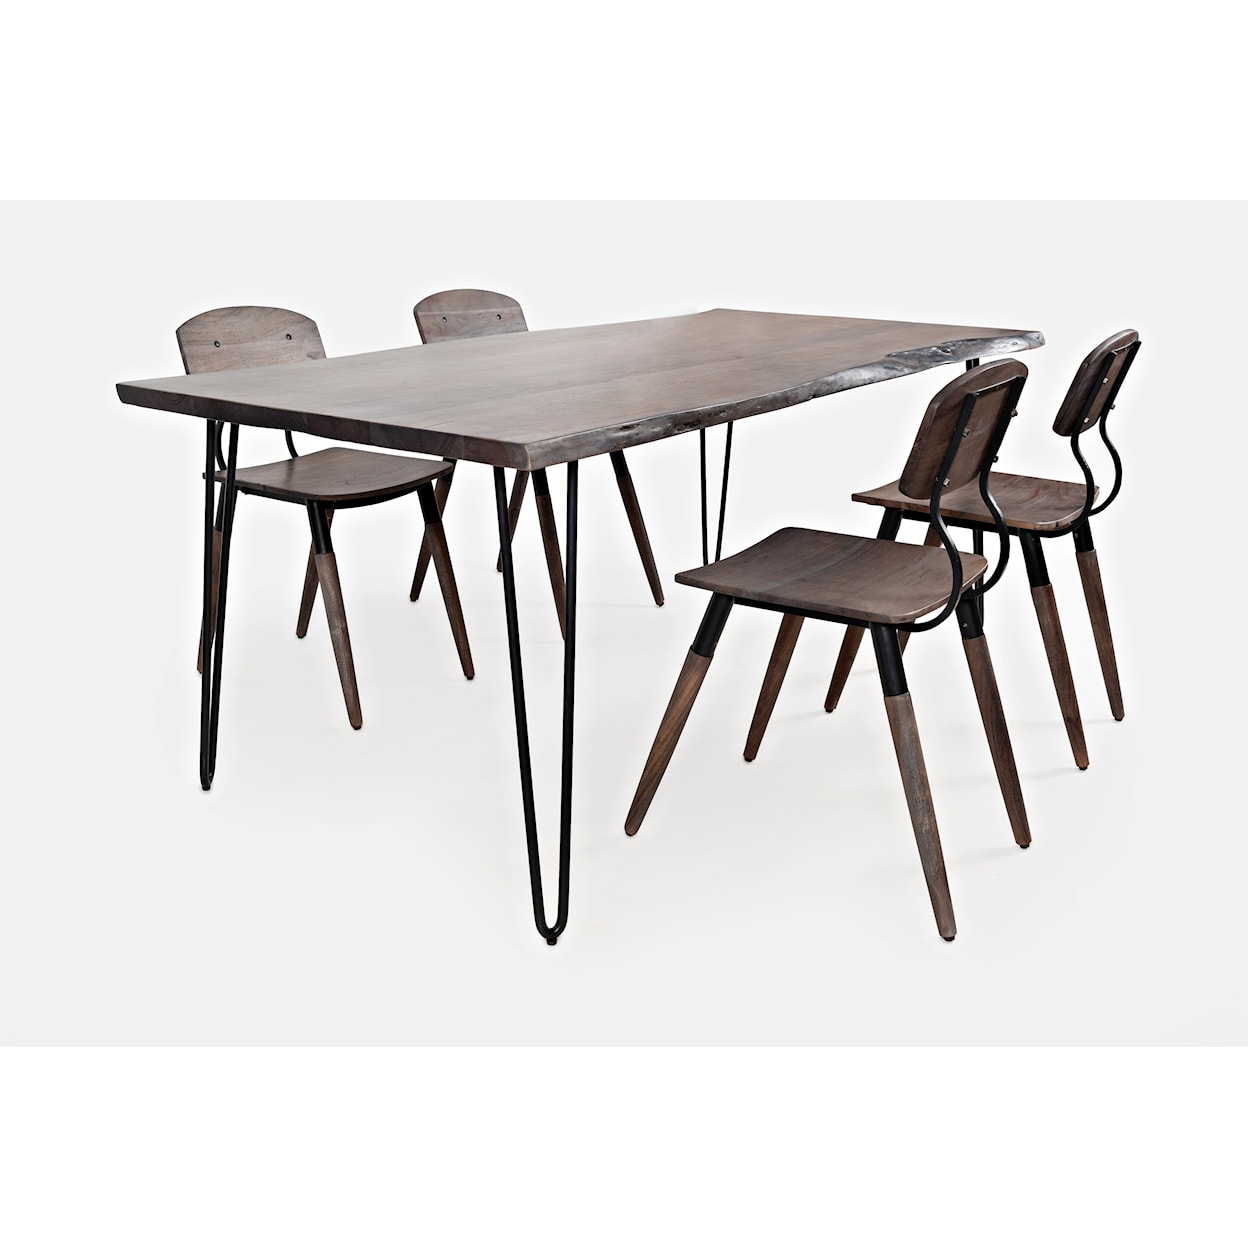 Jofran Nature's Edge 5-Piece Table and Chair Set